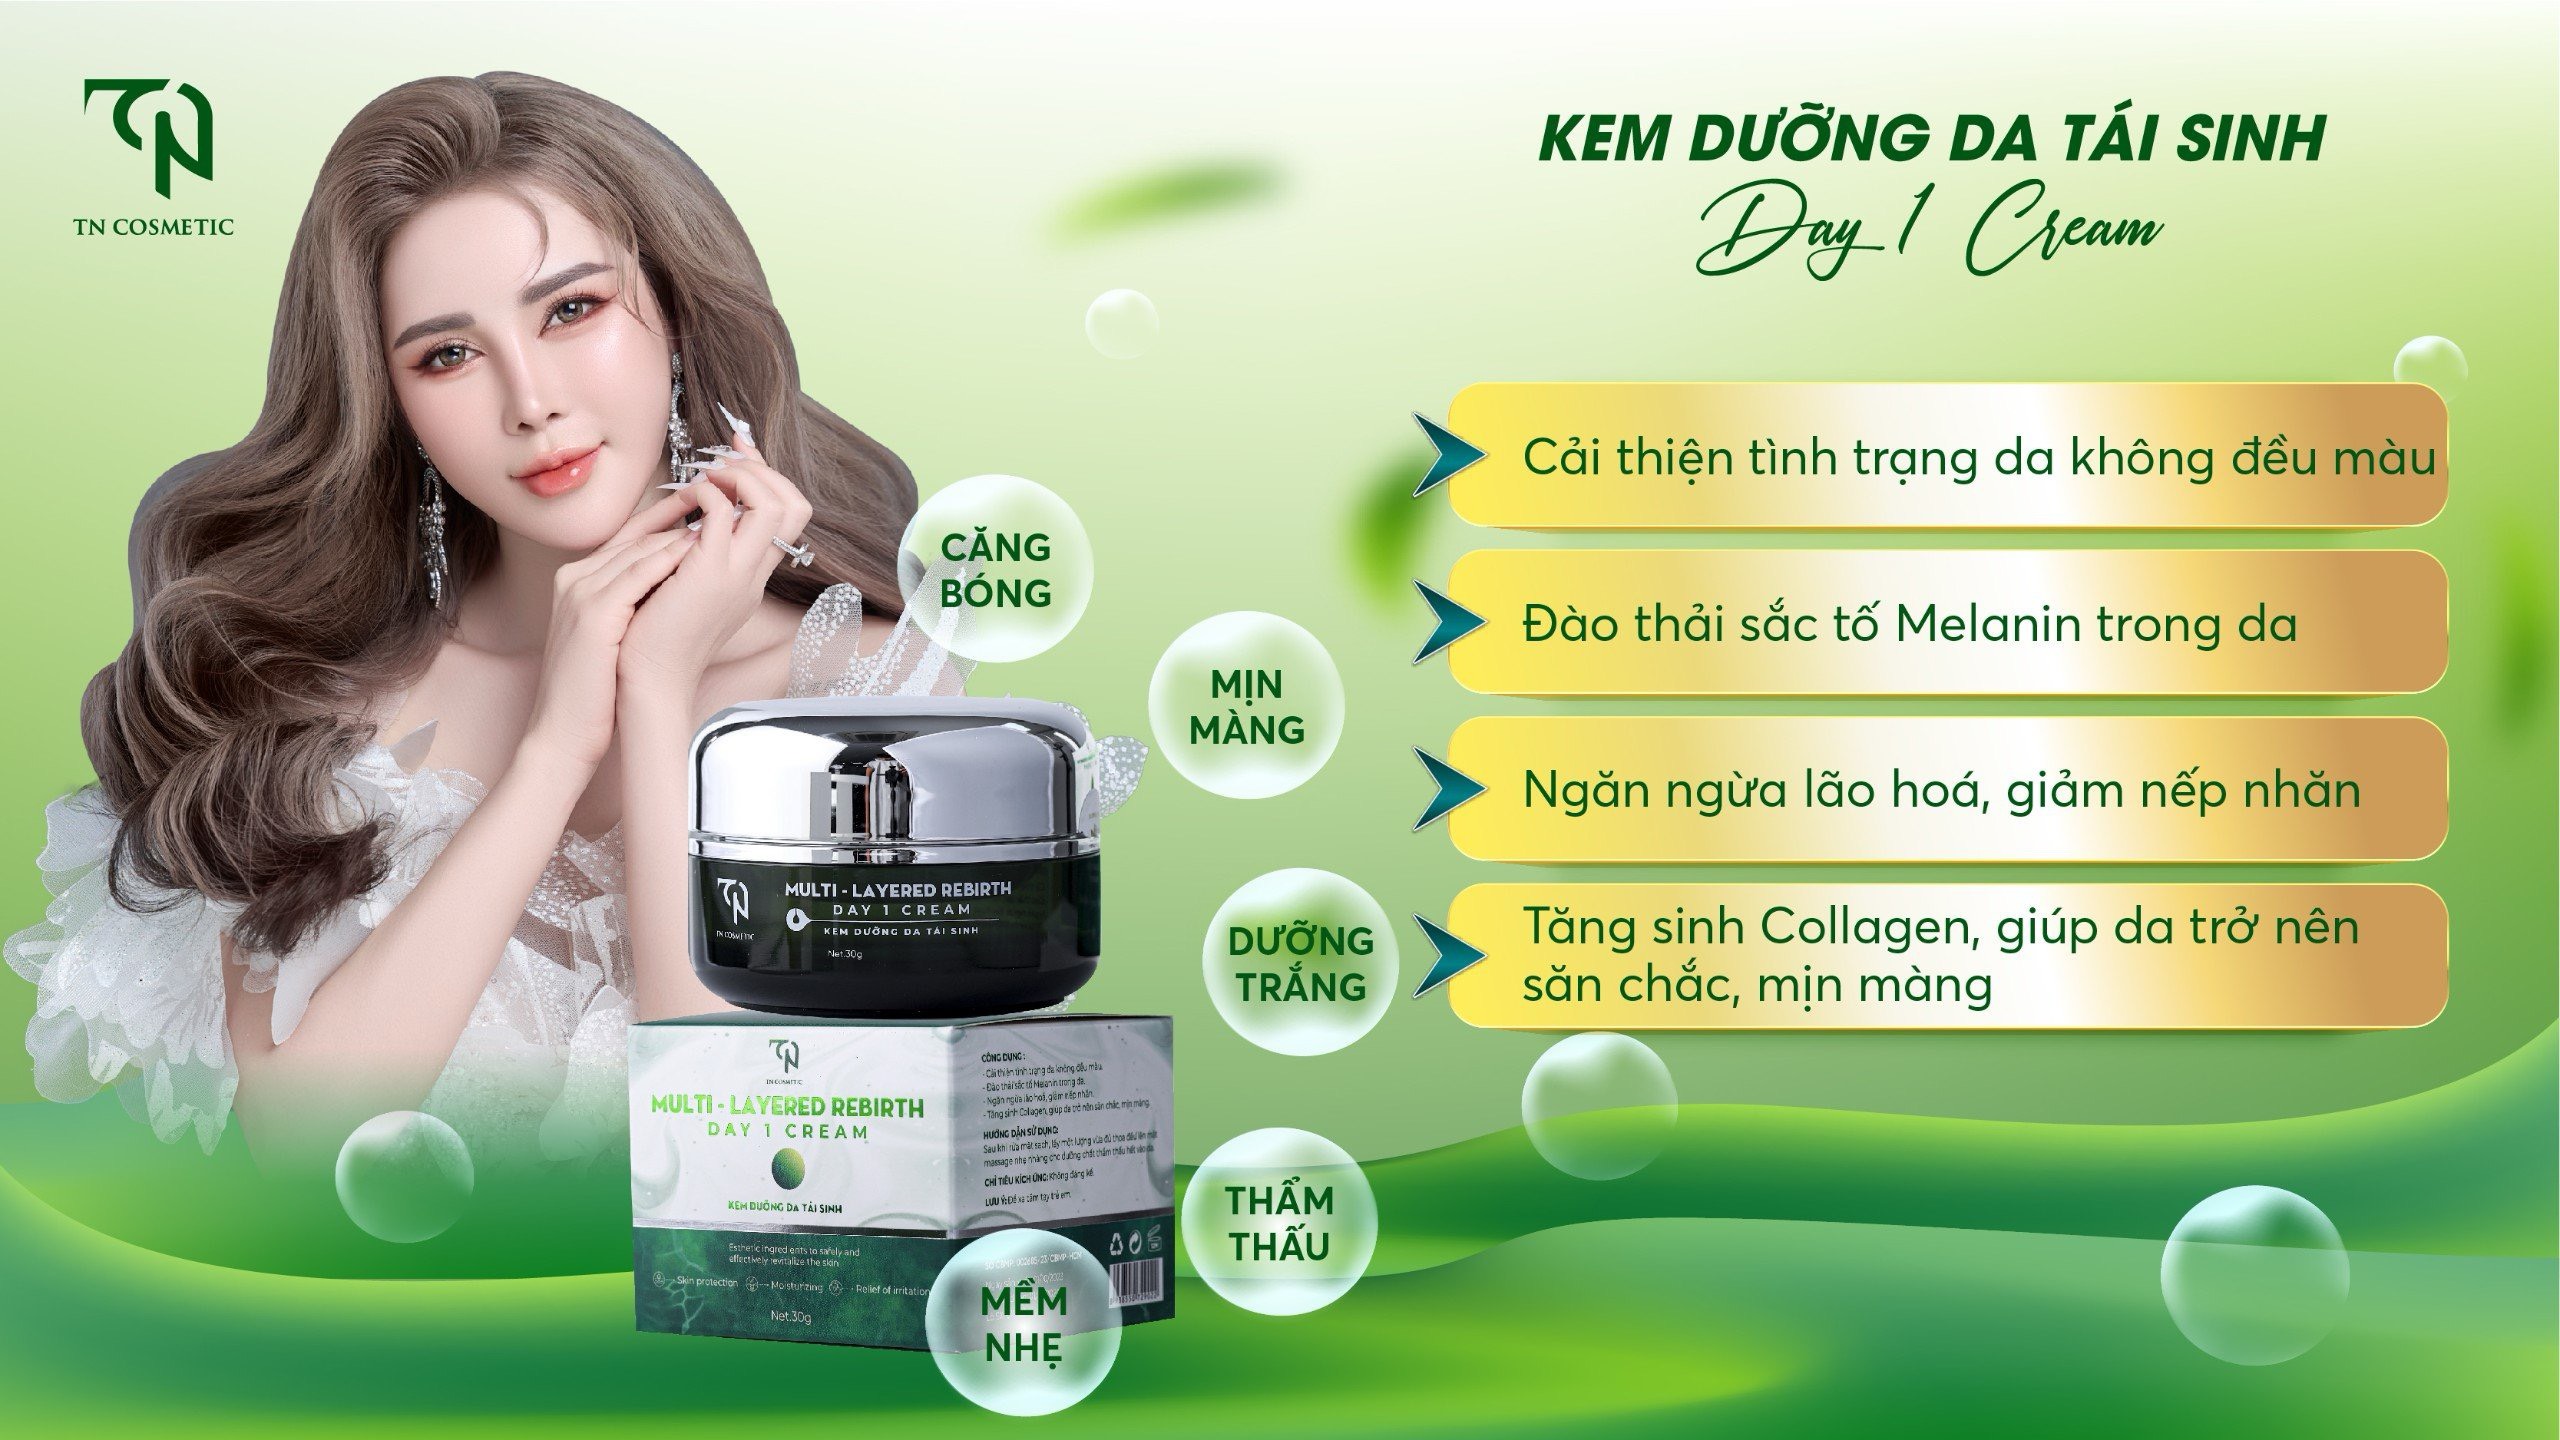 Anh5-kemday1-tncosmetic